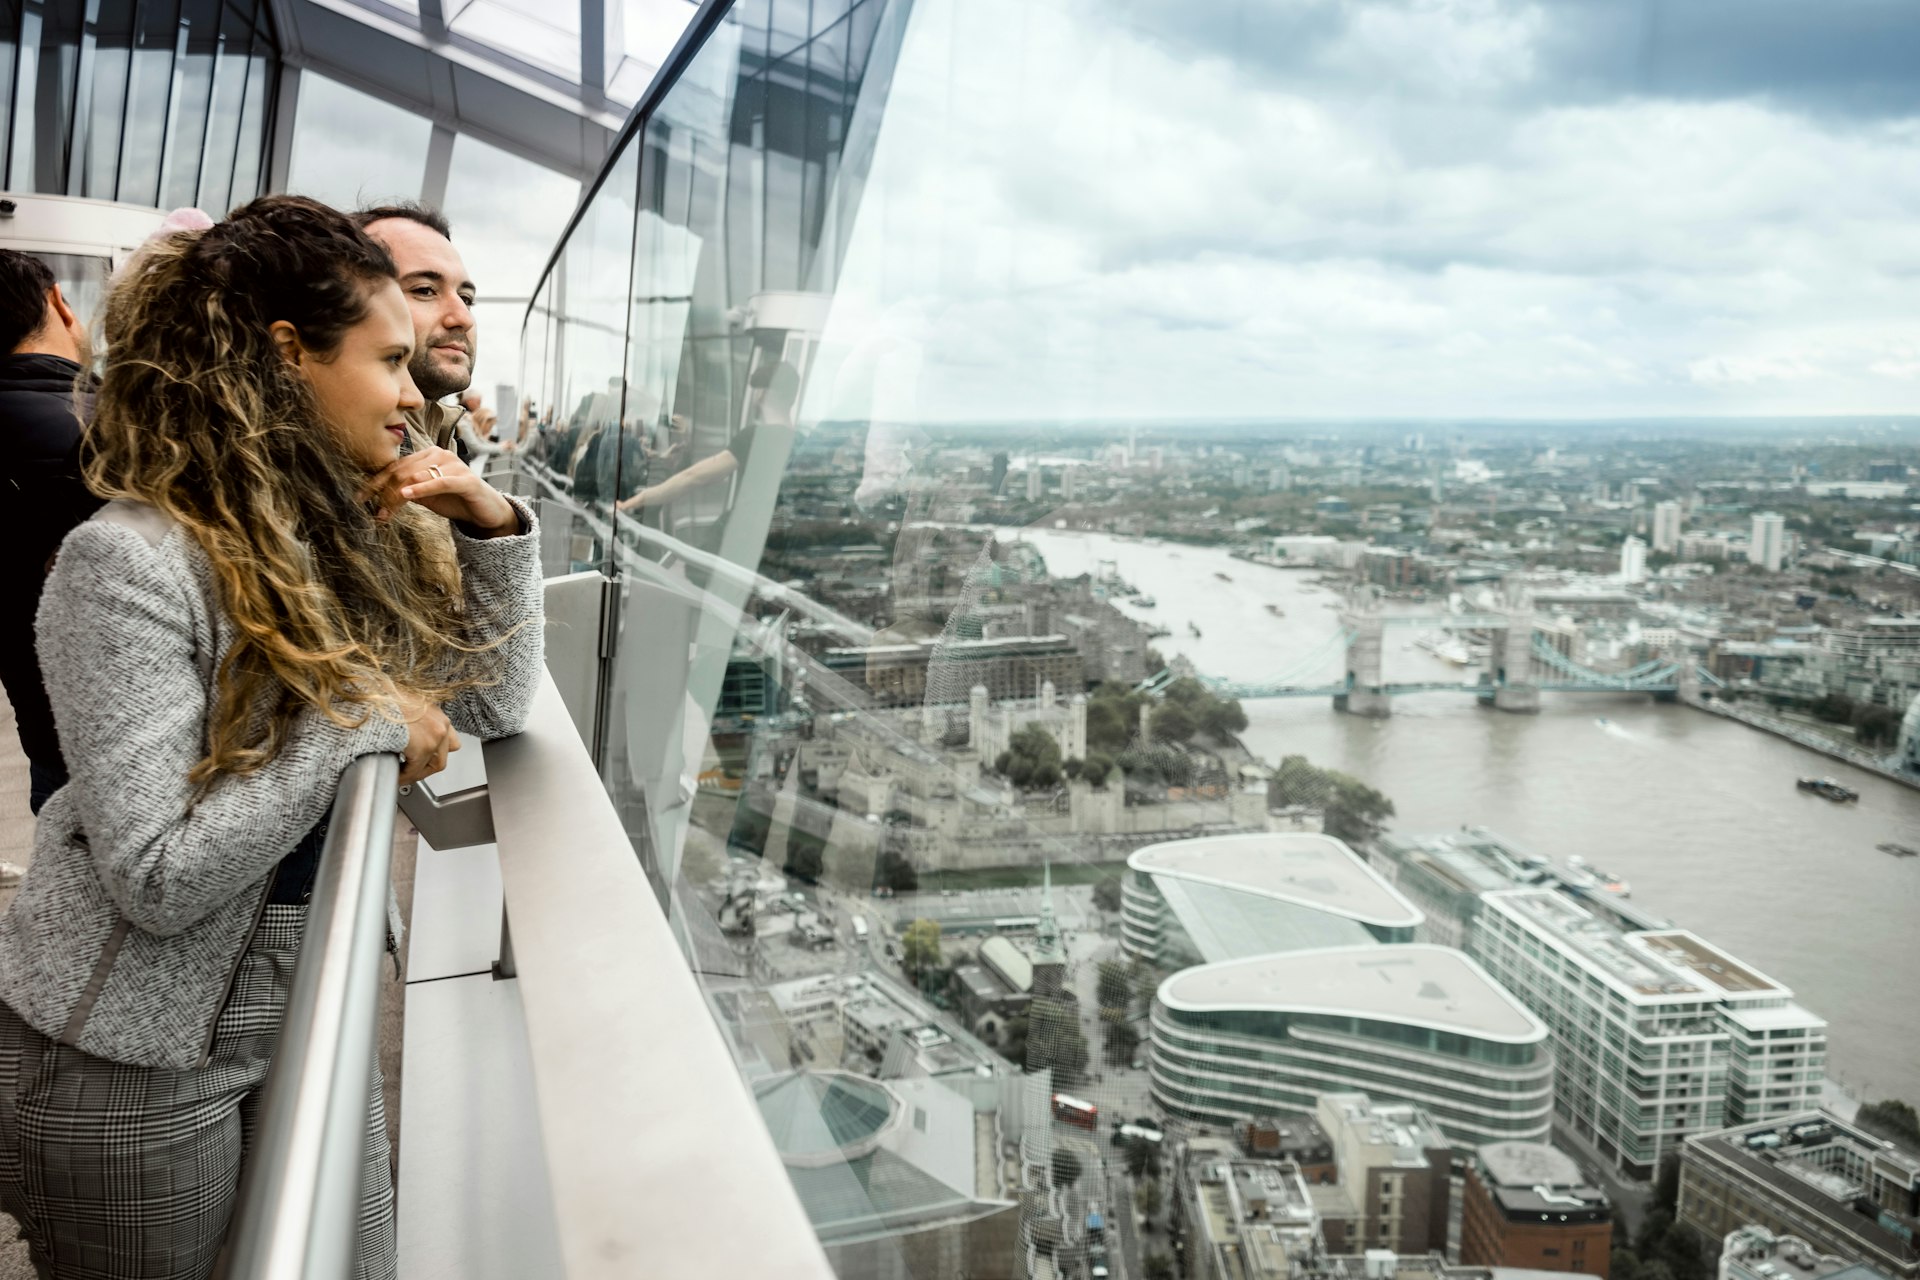 A young couple of tourist enjoying skyline of London from the viewing deck of a very tall building